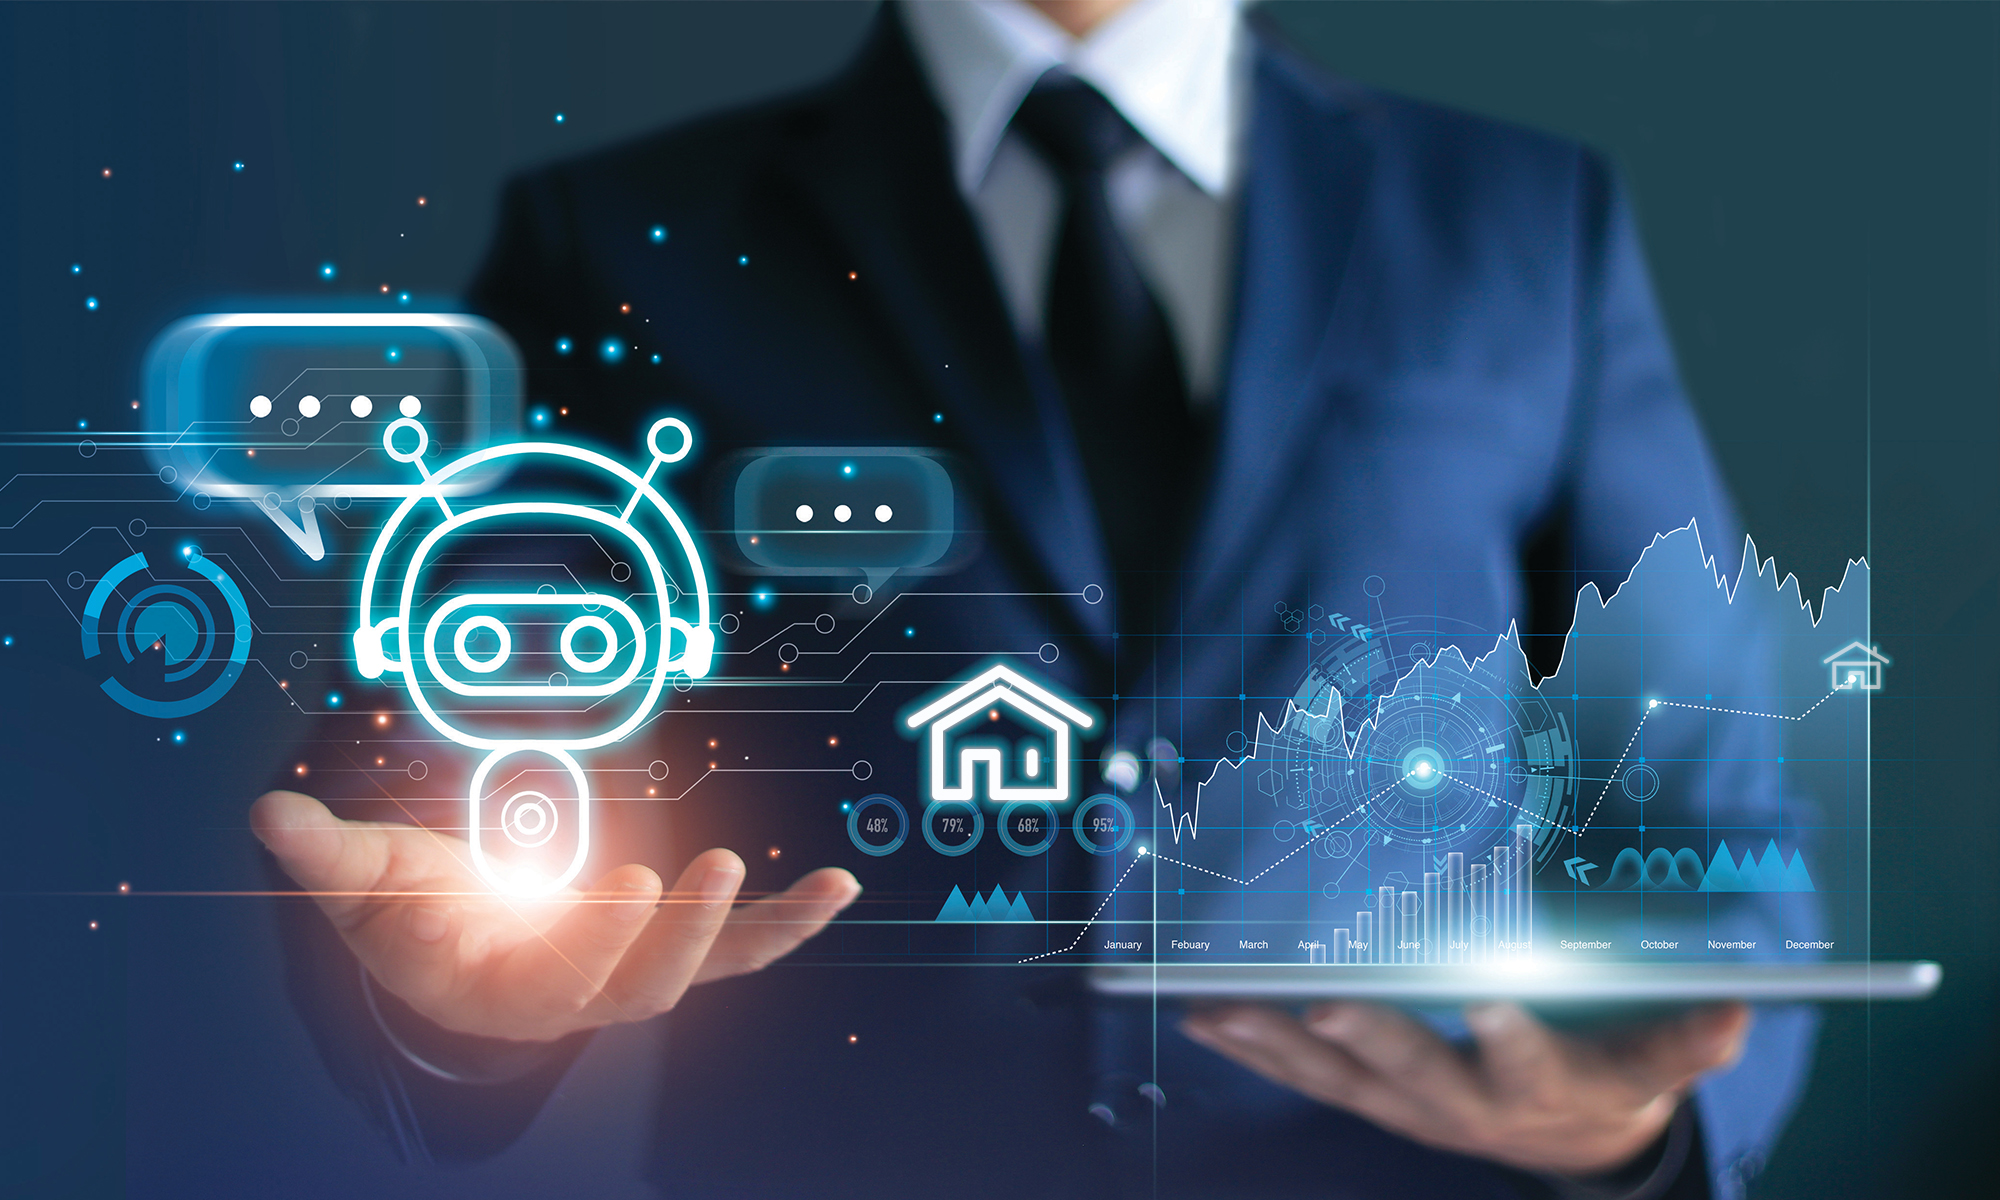 Let’s Talk: For Mortgage CX Conversational AI, the Timing is Perfect